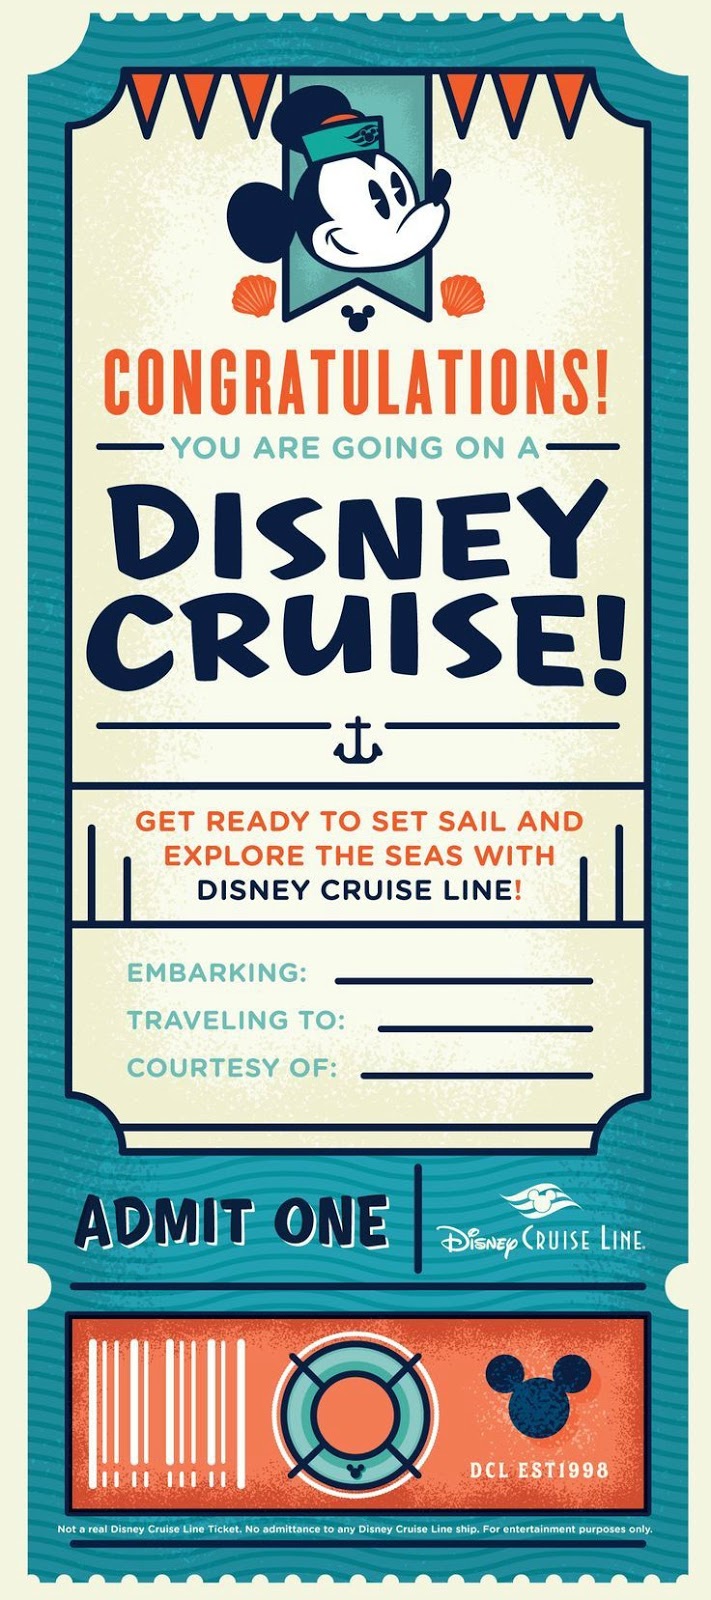 organized-chaos-we-are-going-on-a-disney-cruise